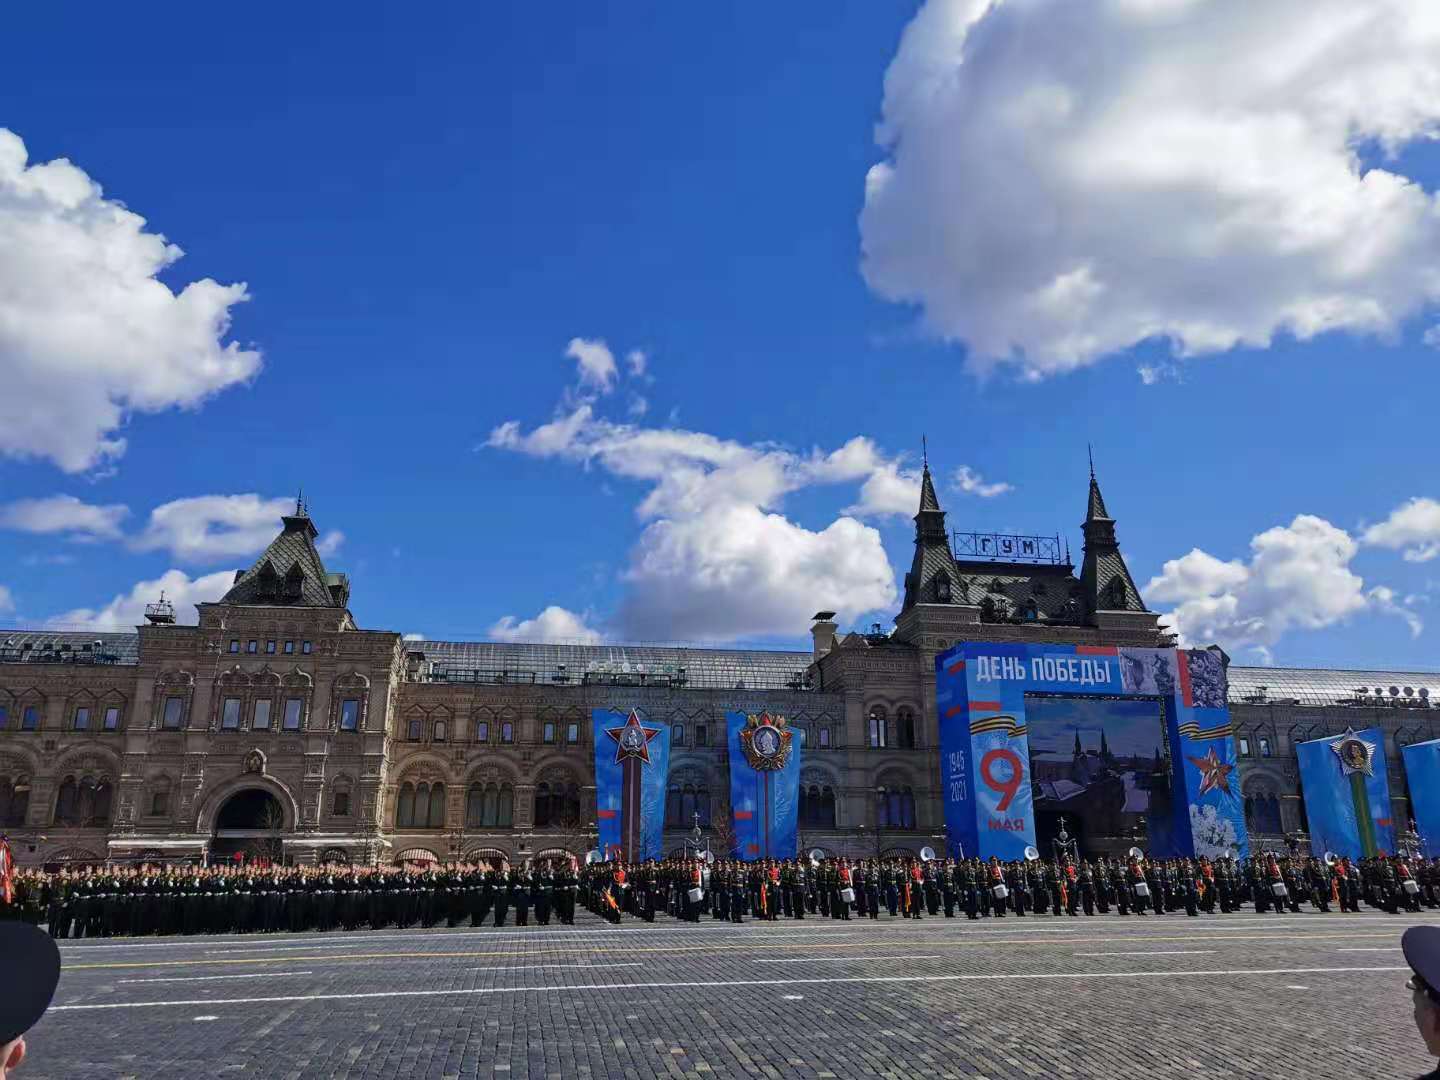 Russia marks the 76th anniversary of the victory of the Patriotic War at the end of the Red Square parade